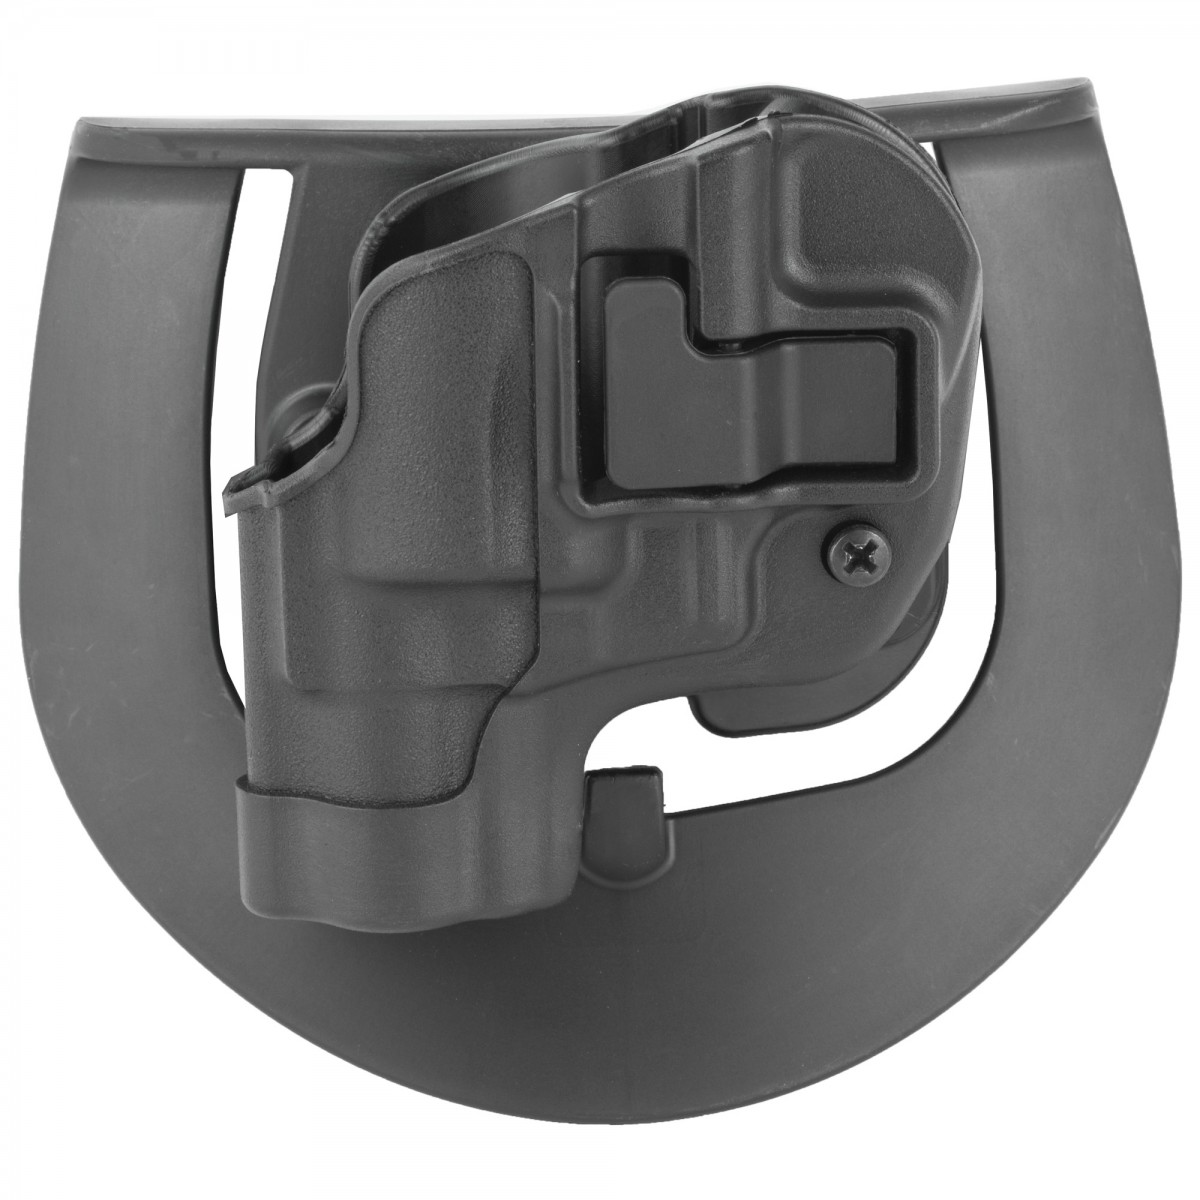 https://gunmagwarehouse.com/media/catalog/product/cache/1/image/1200x1200/9df78eab33525d08d6e5fb8d27136e95/b/l/blackhawk-cqc-serpa-holster-with-belt-and-paddle-attachment-fits-j-frame-revolvers-with-2-inch-barrel-1.jpg